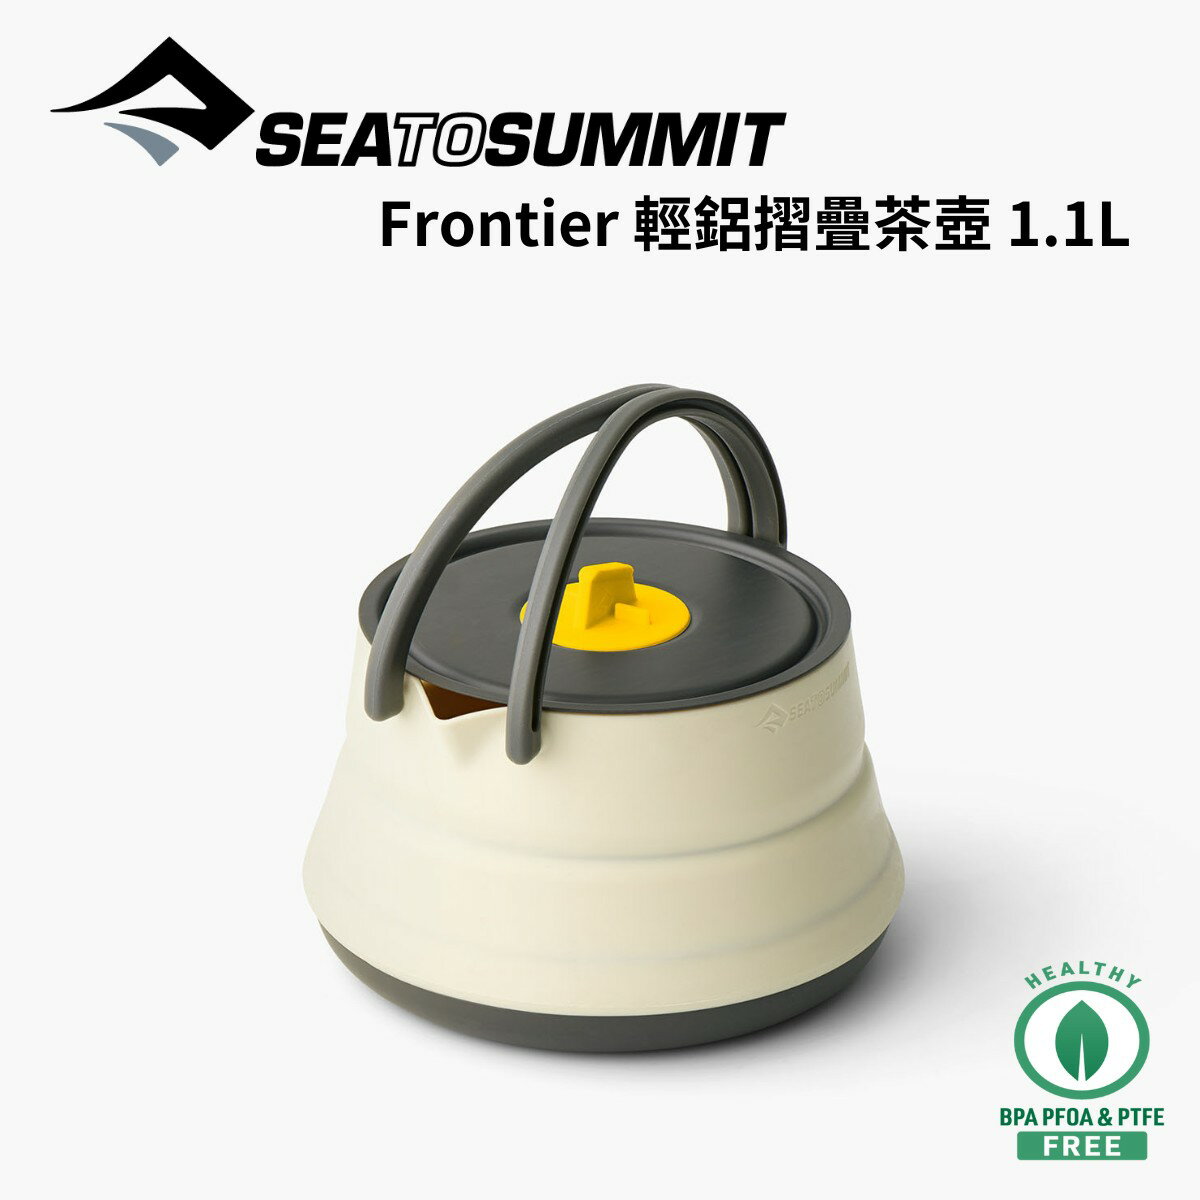 【Sea to Summit】Frontier 輕鋁摺疊茶壺 1.1L Frontier Ultralight Collapsible Kettle